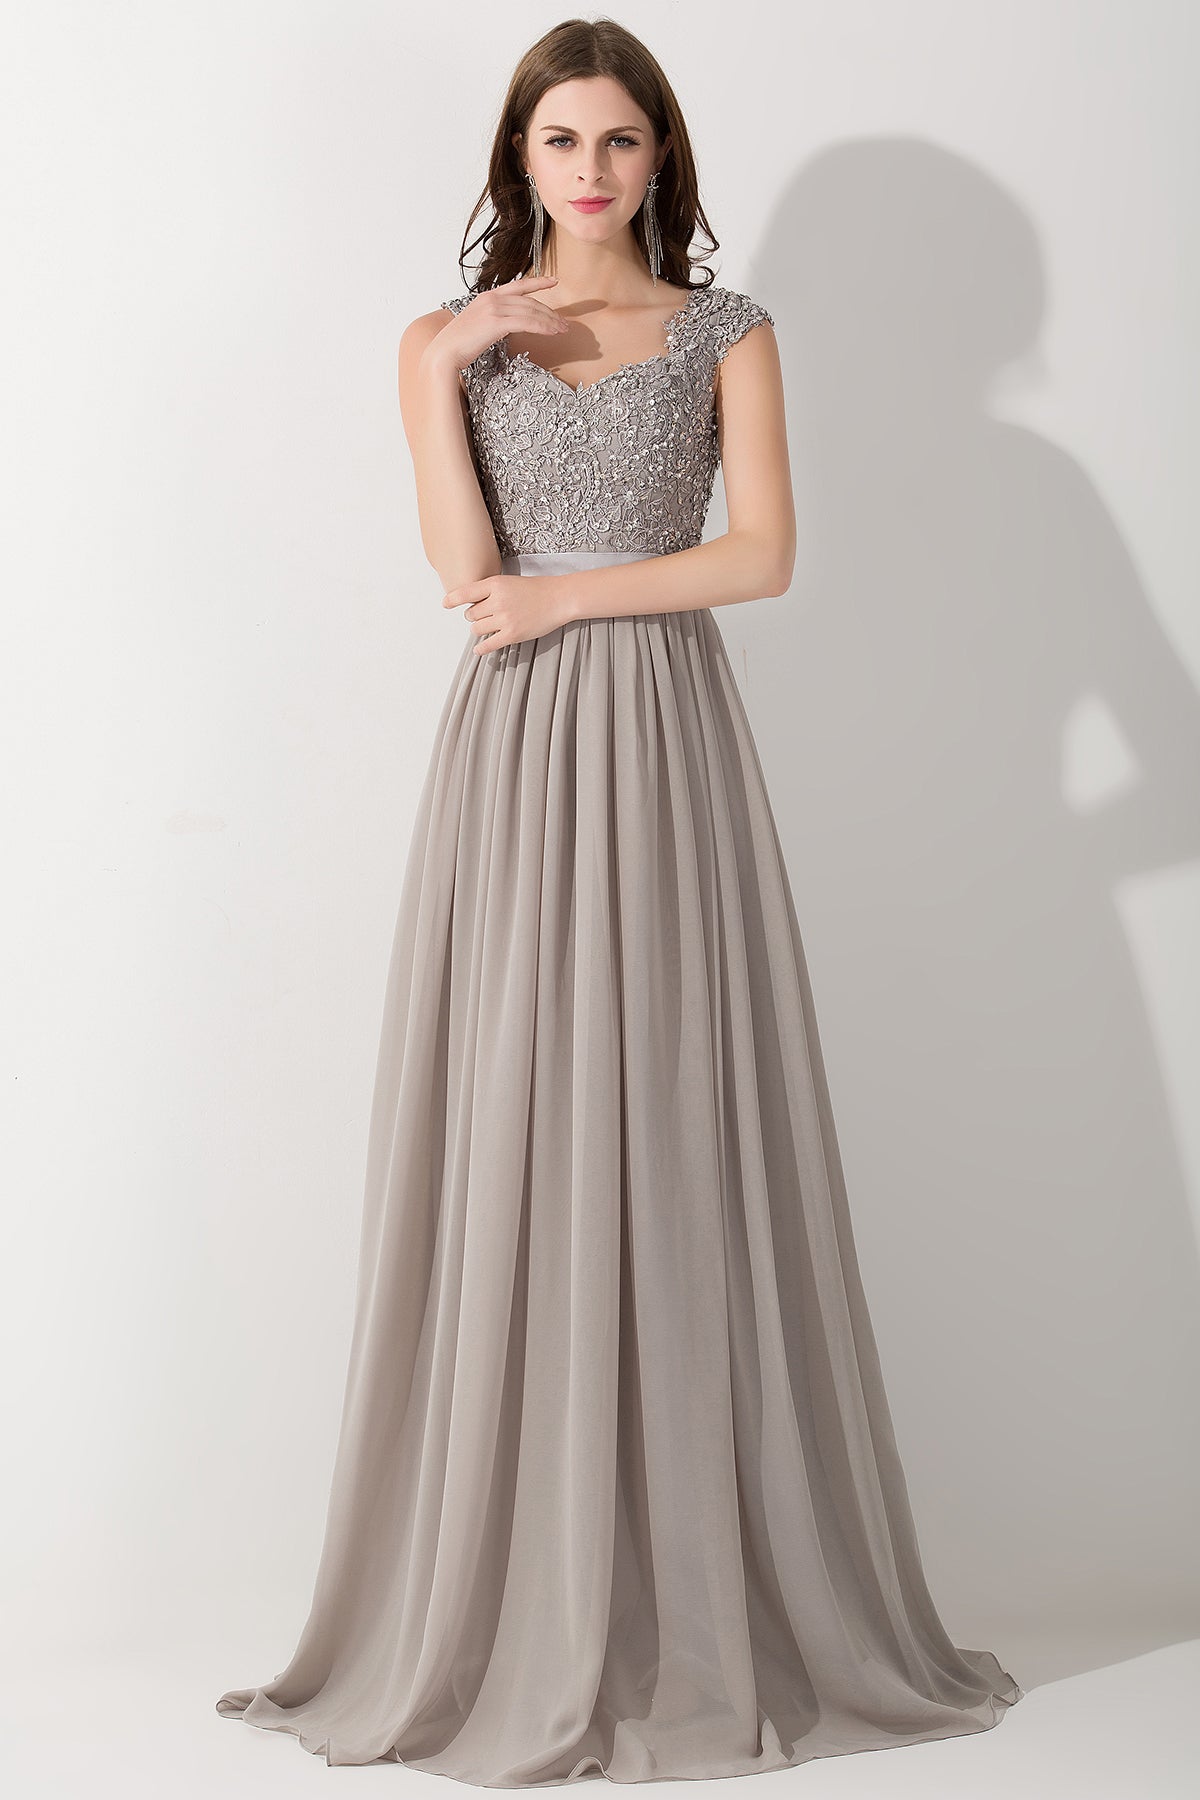 Vintage Silver Sleeveless Long Bridesmaid Dress With Appliques-27dress